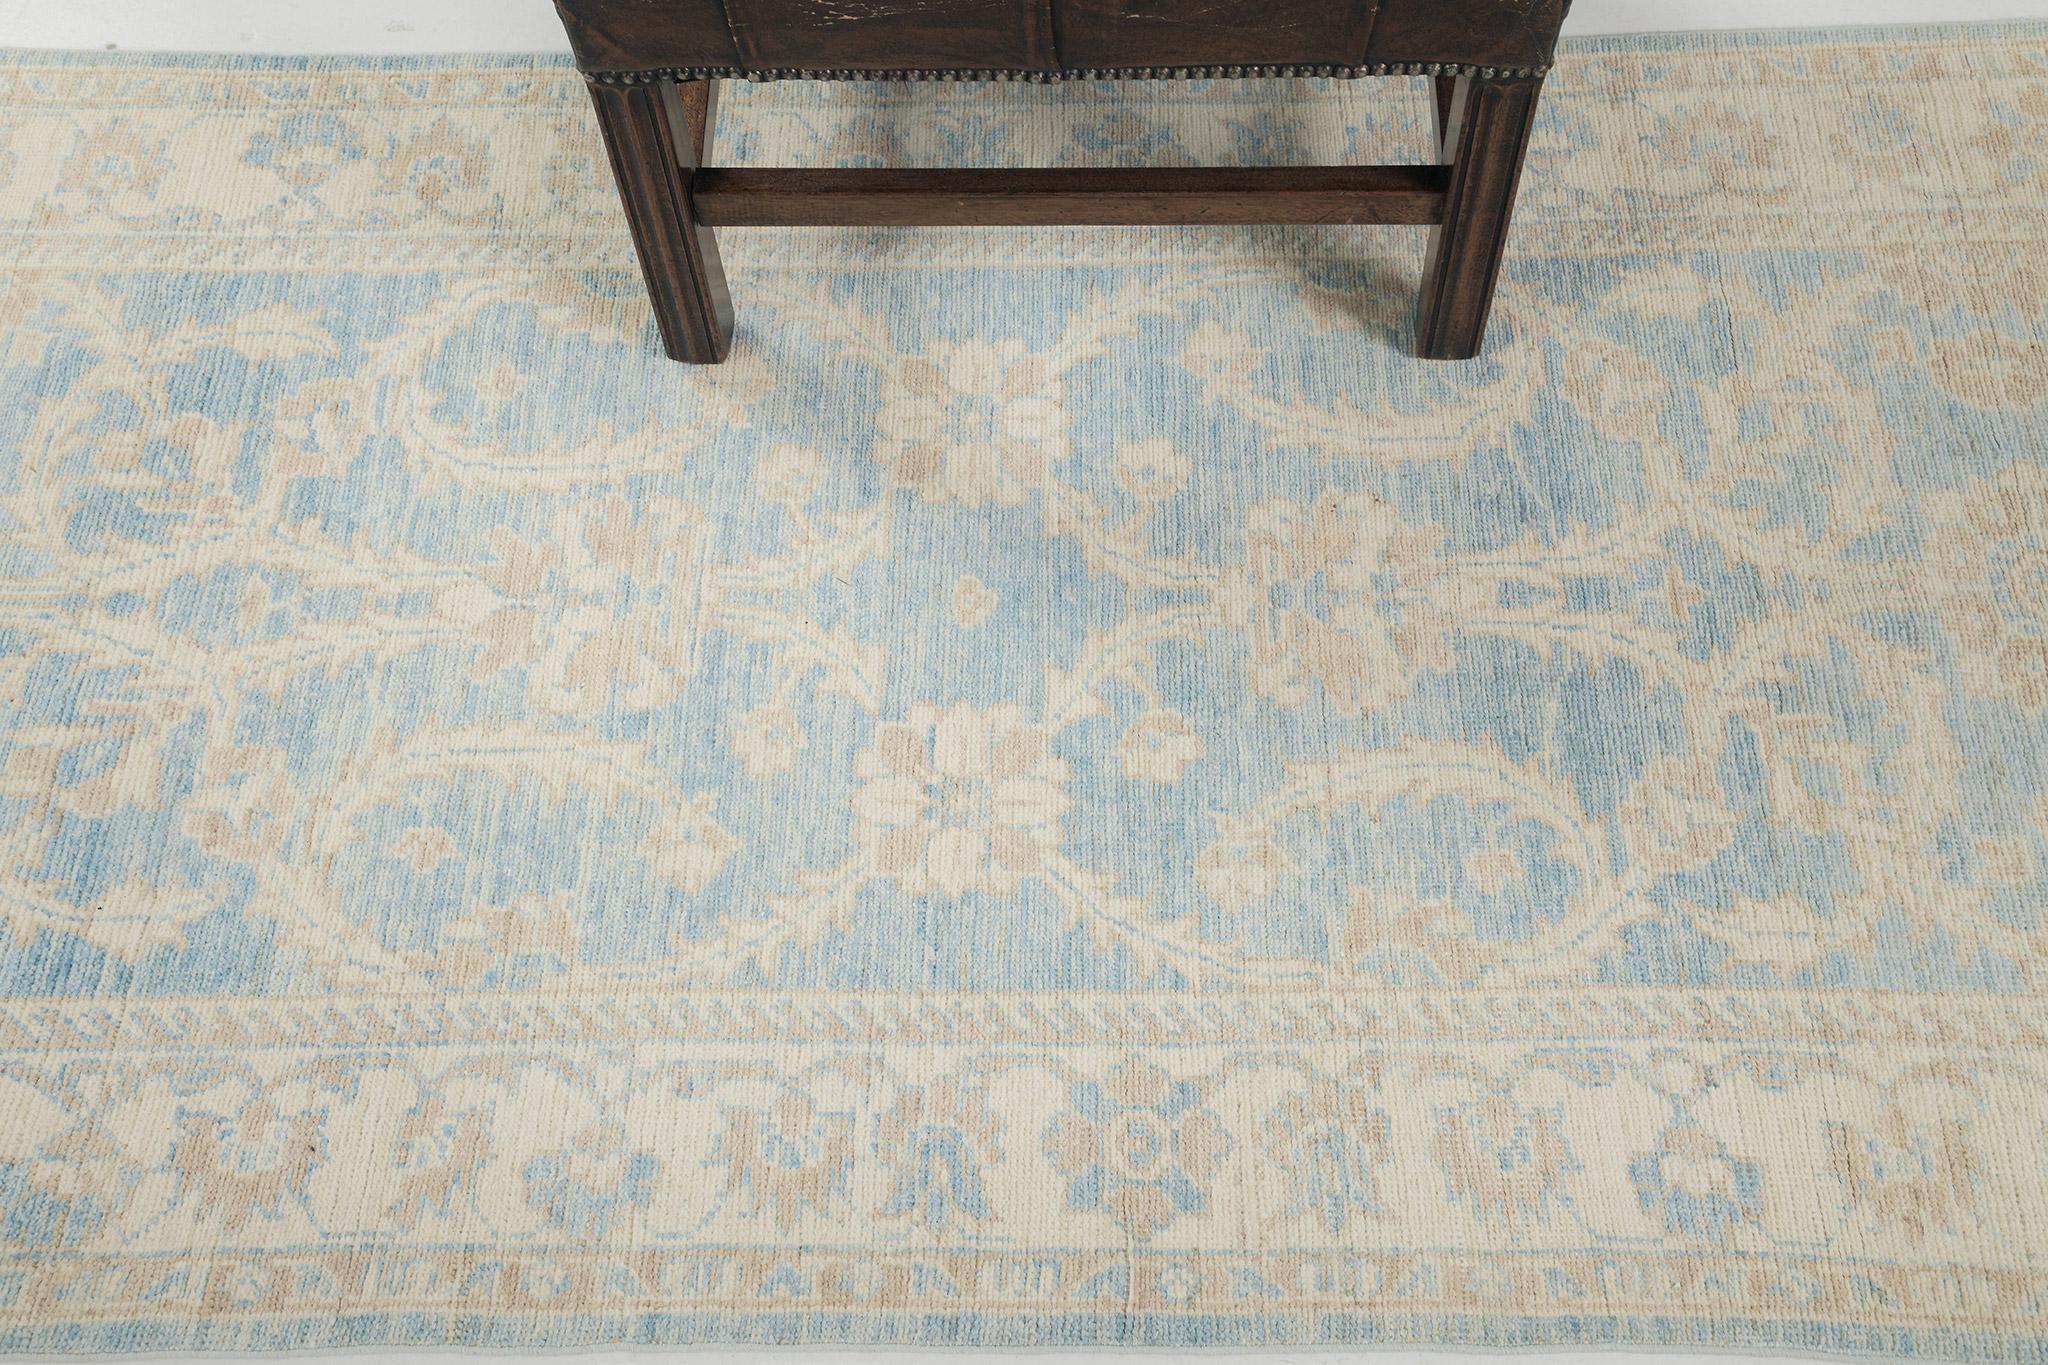 This will be an impeccable choice to style your home with our Sultanabad Rug revival. Perfect anywhere and in any style you want. Impressive vines are connected with various embellishments and symbolic elements in oatmeal, cream, and gold accents in